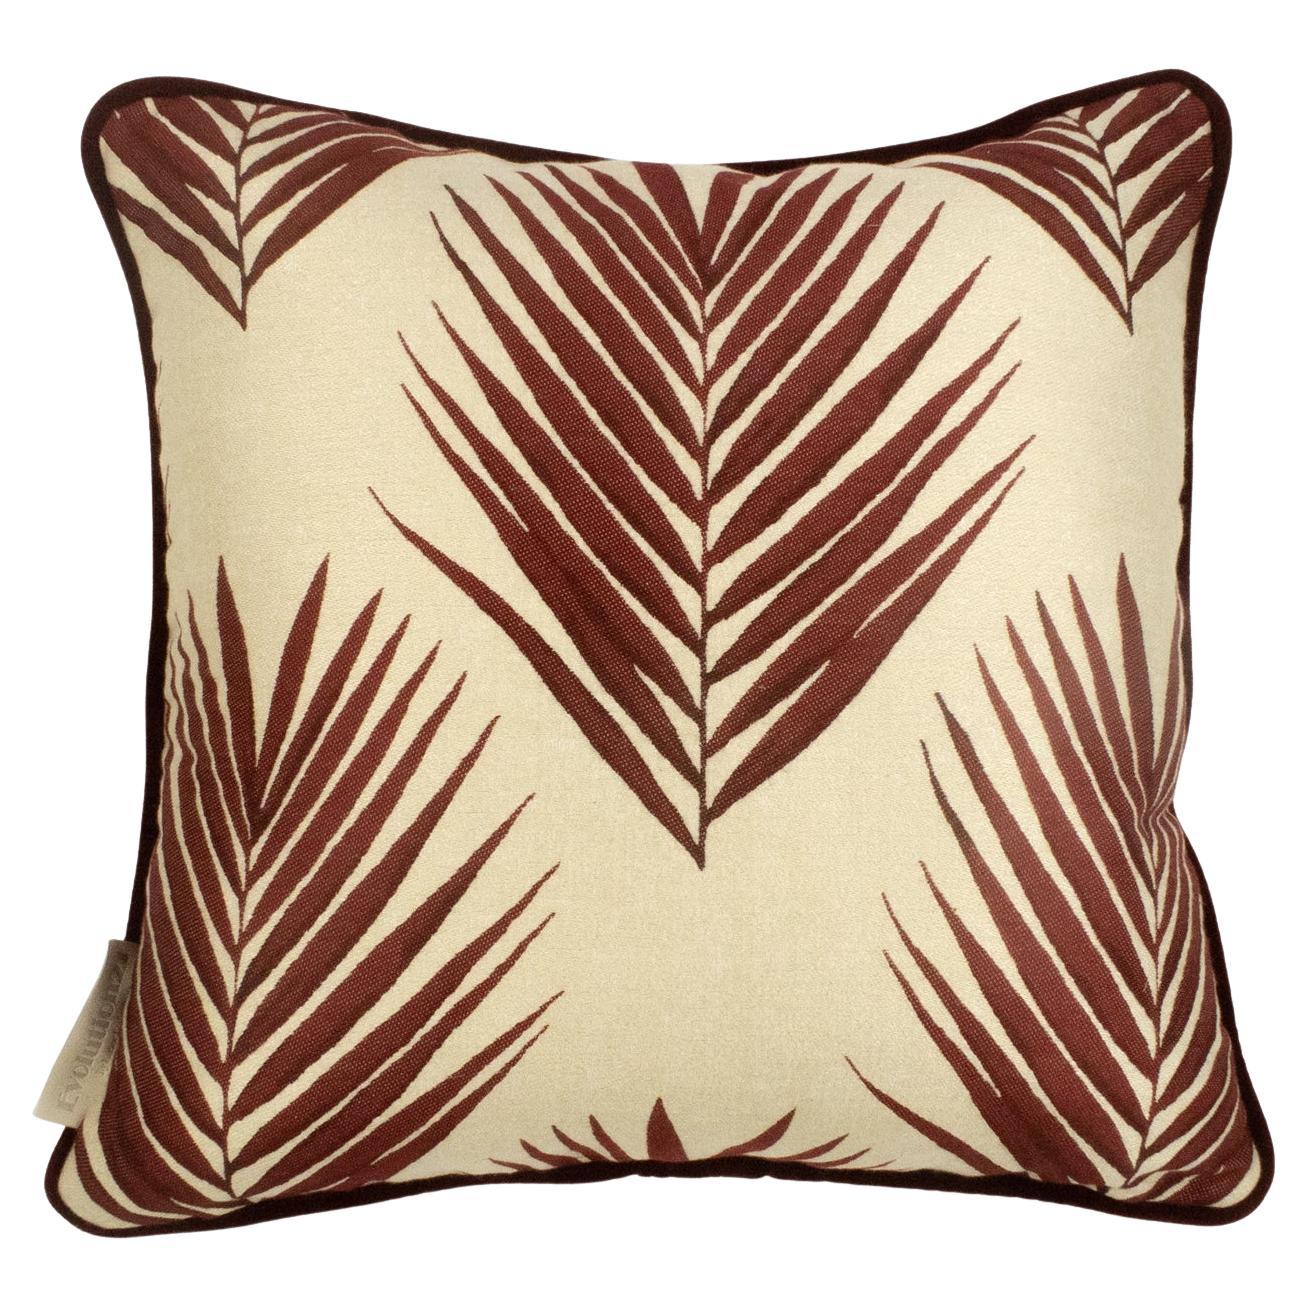 Cushion / Pillow Patterned Bamboo Leaf Red by Evolution21 For Sale